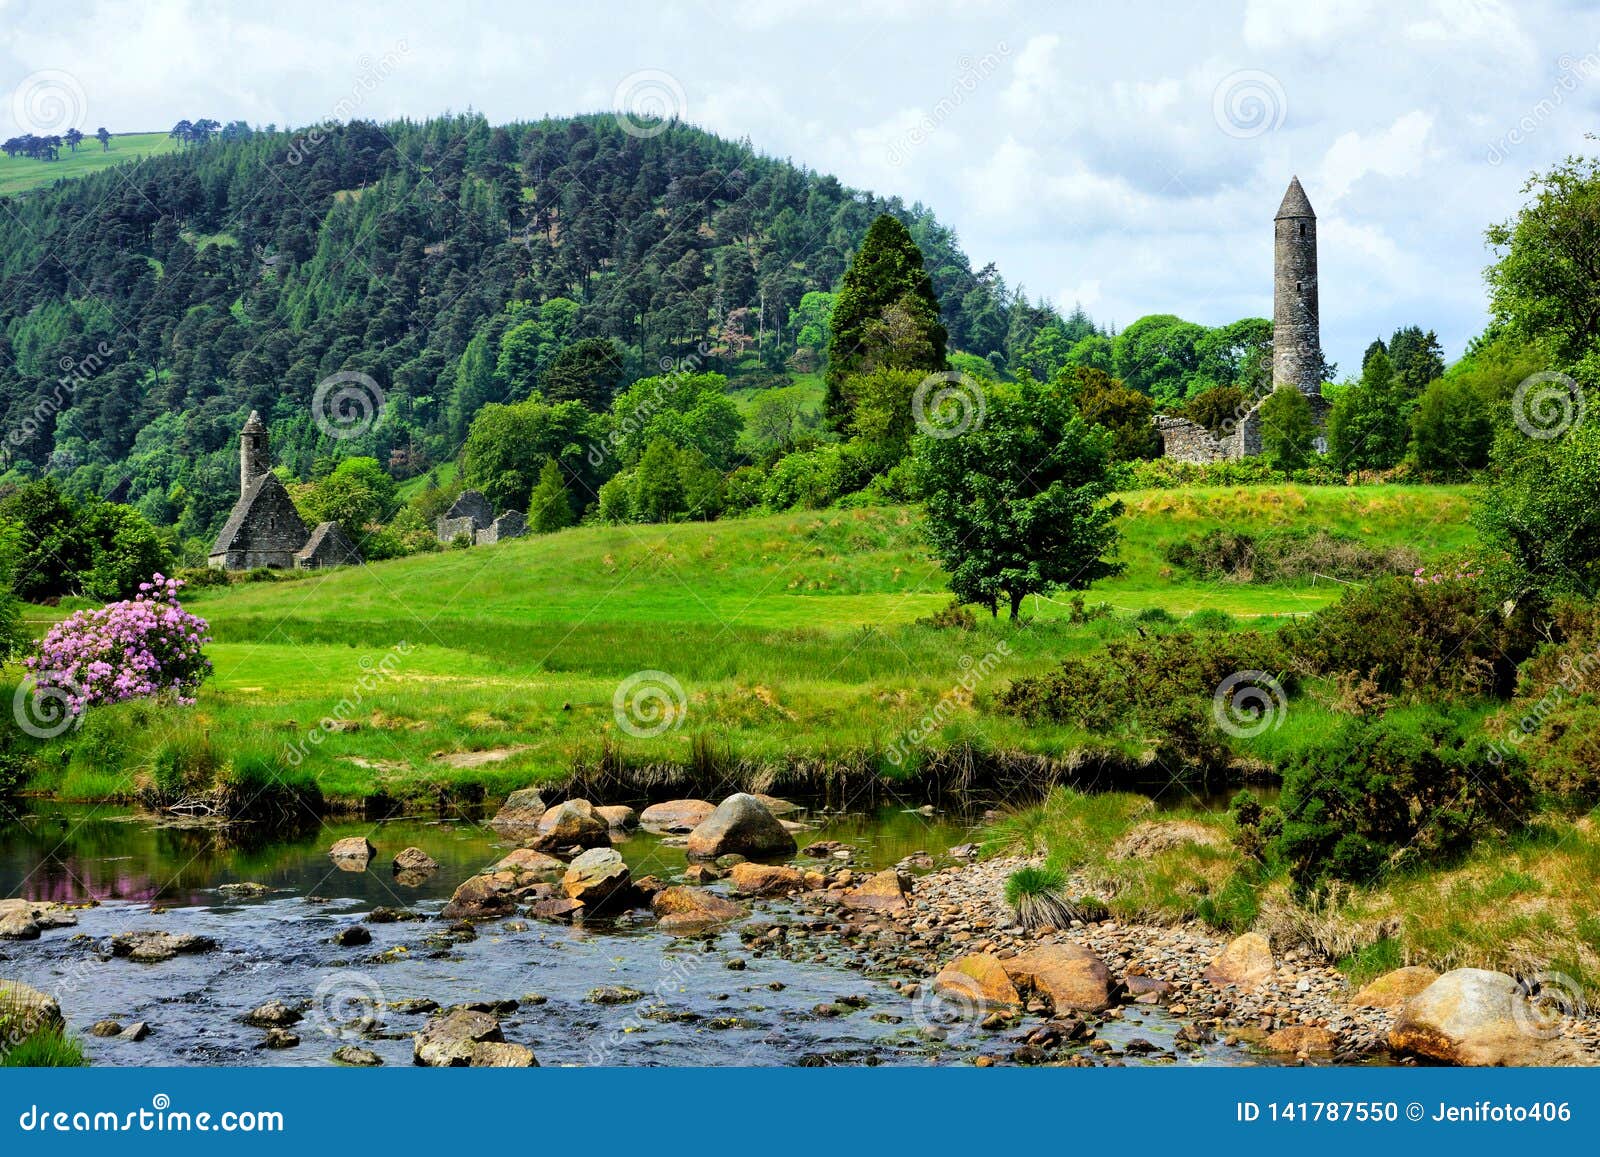 glendalough monastic site with ancient round tower and church, wicklow national park, ireland